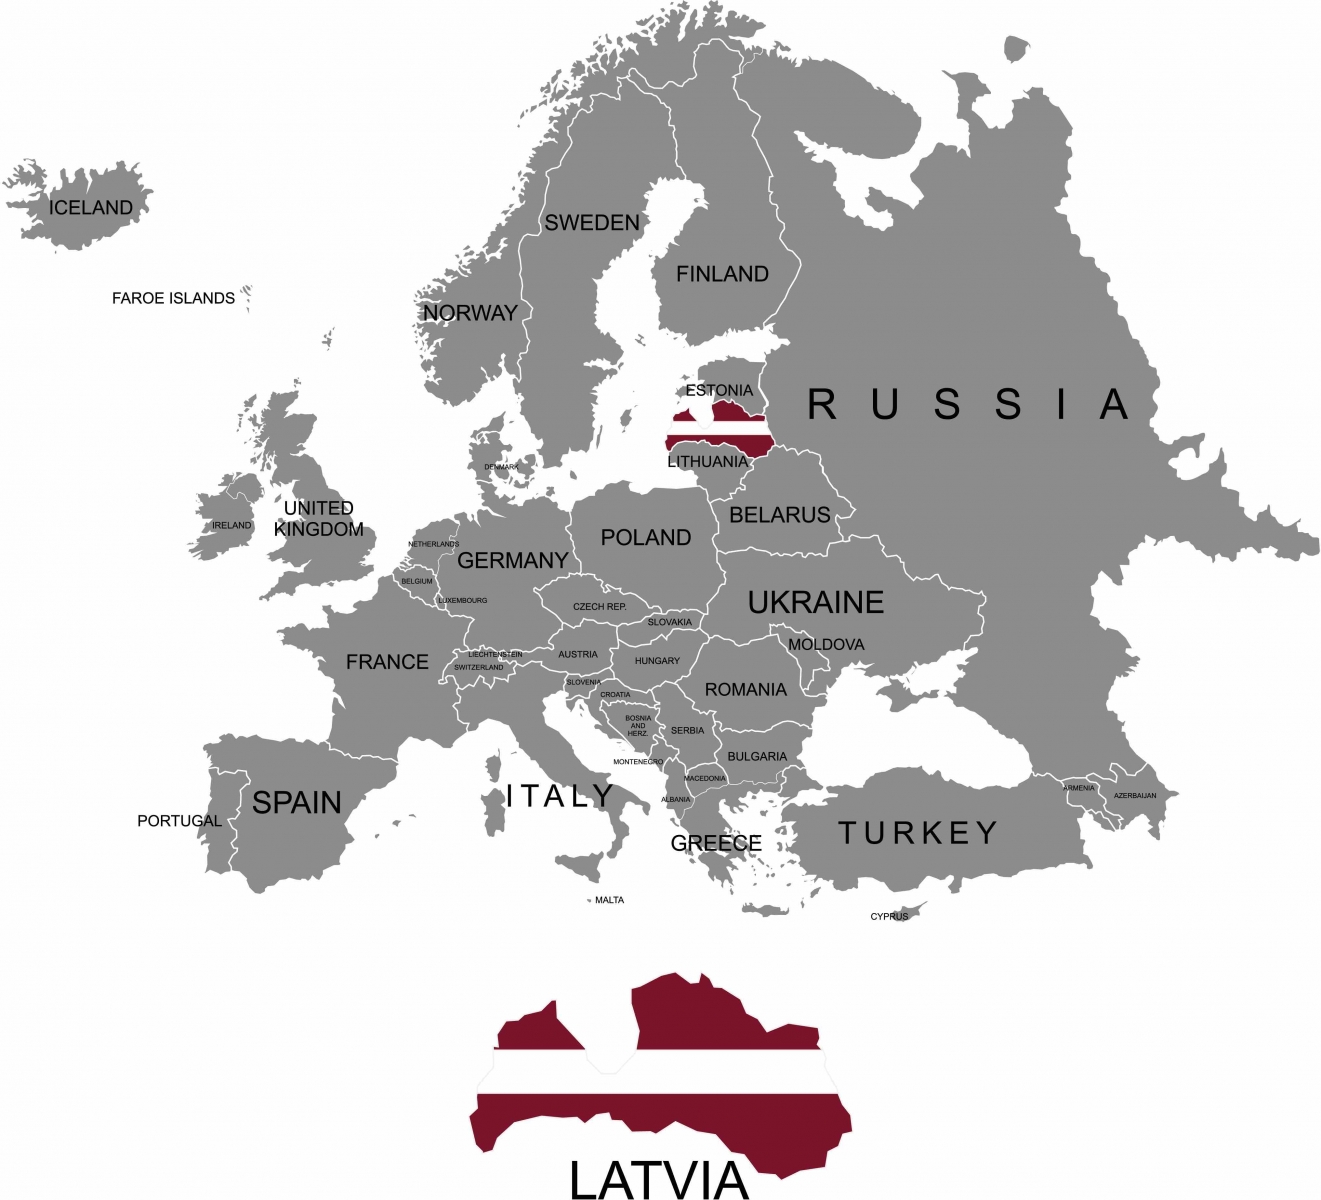 Territory of Europe continent. Latvia